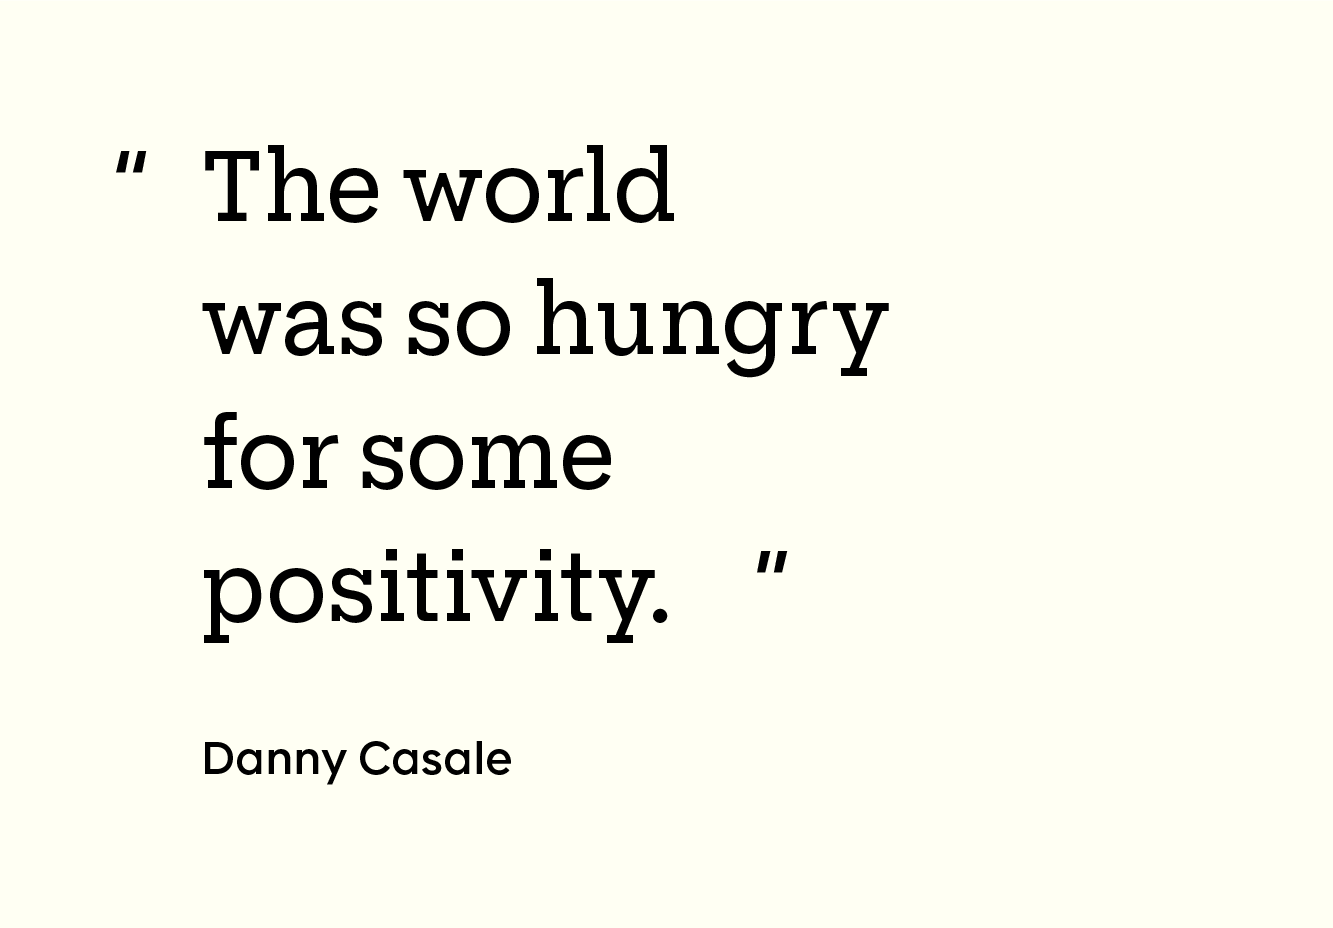 Quote by Danny Casale: “The world was so hungry for some positivity.”